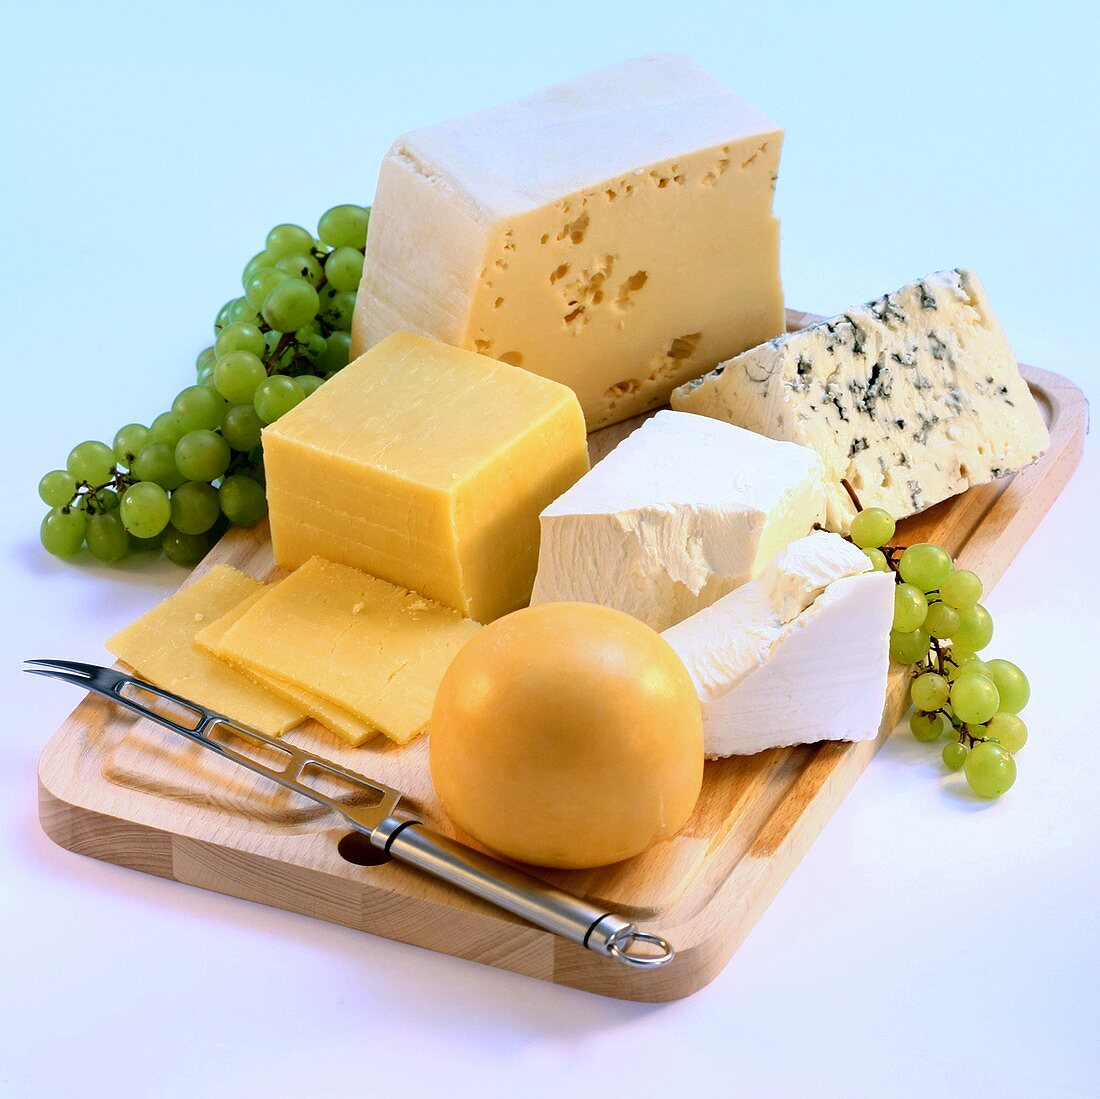 Several types of cheese on a wooden board